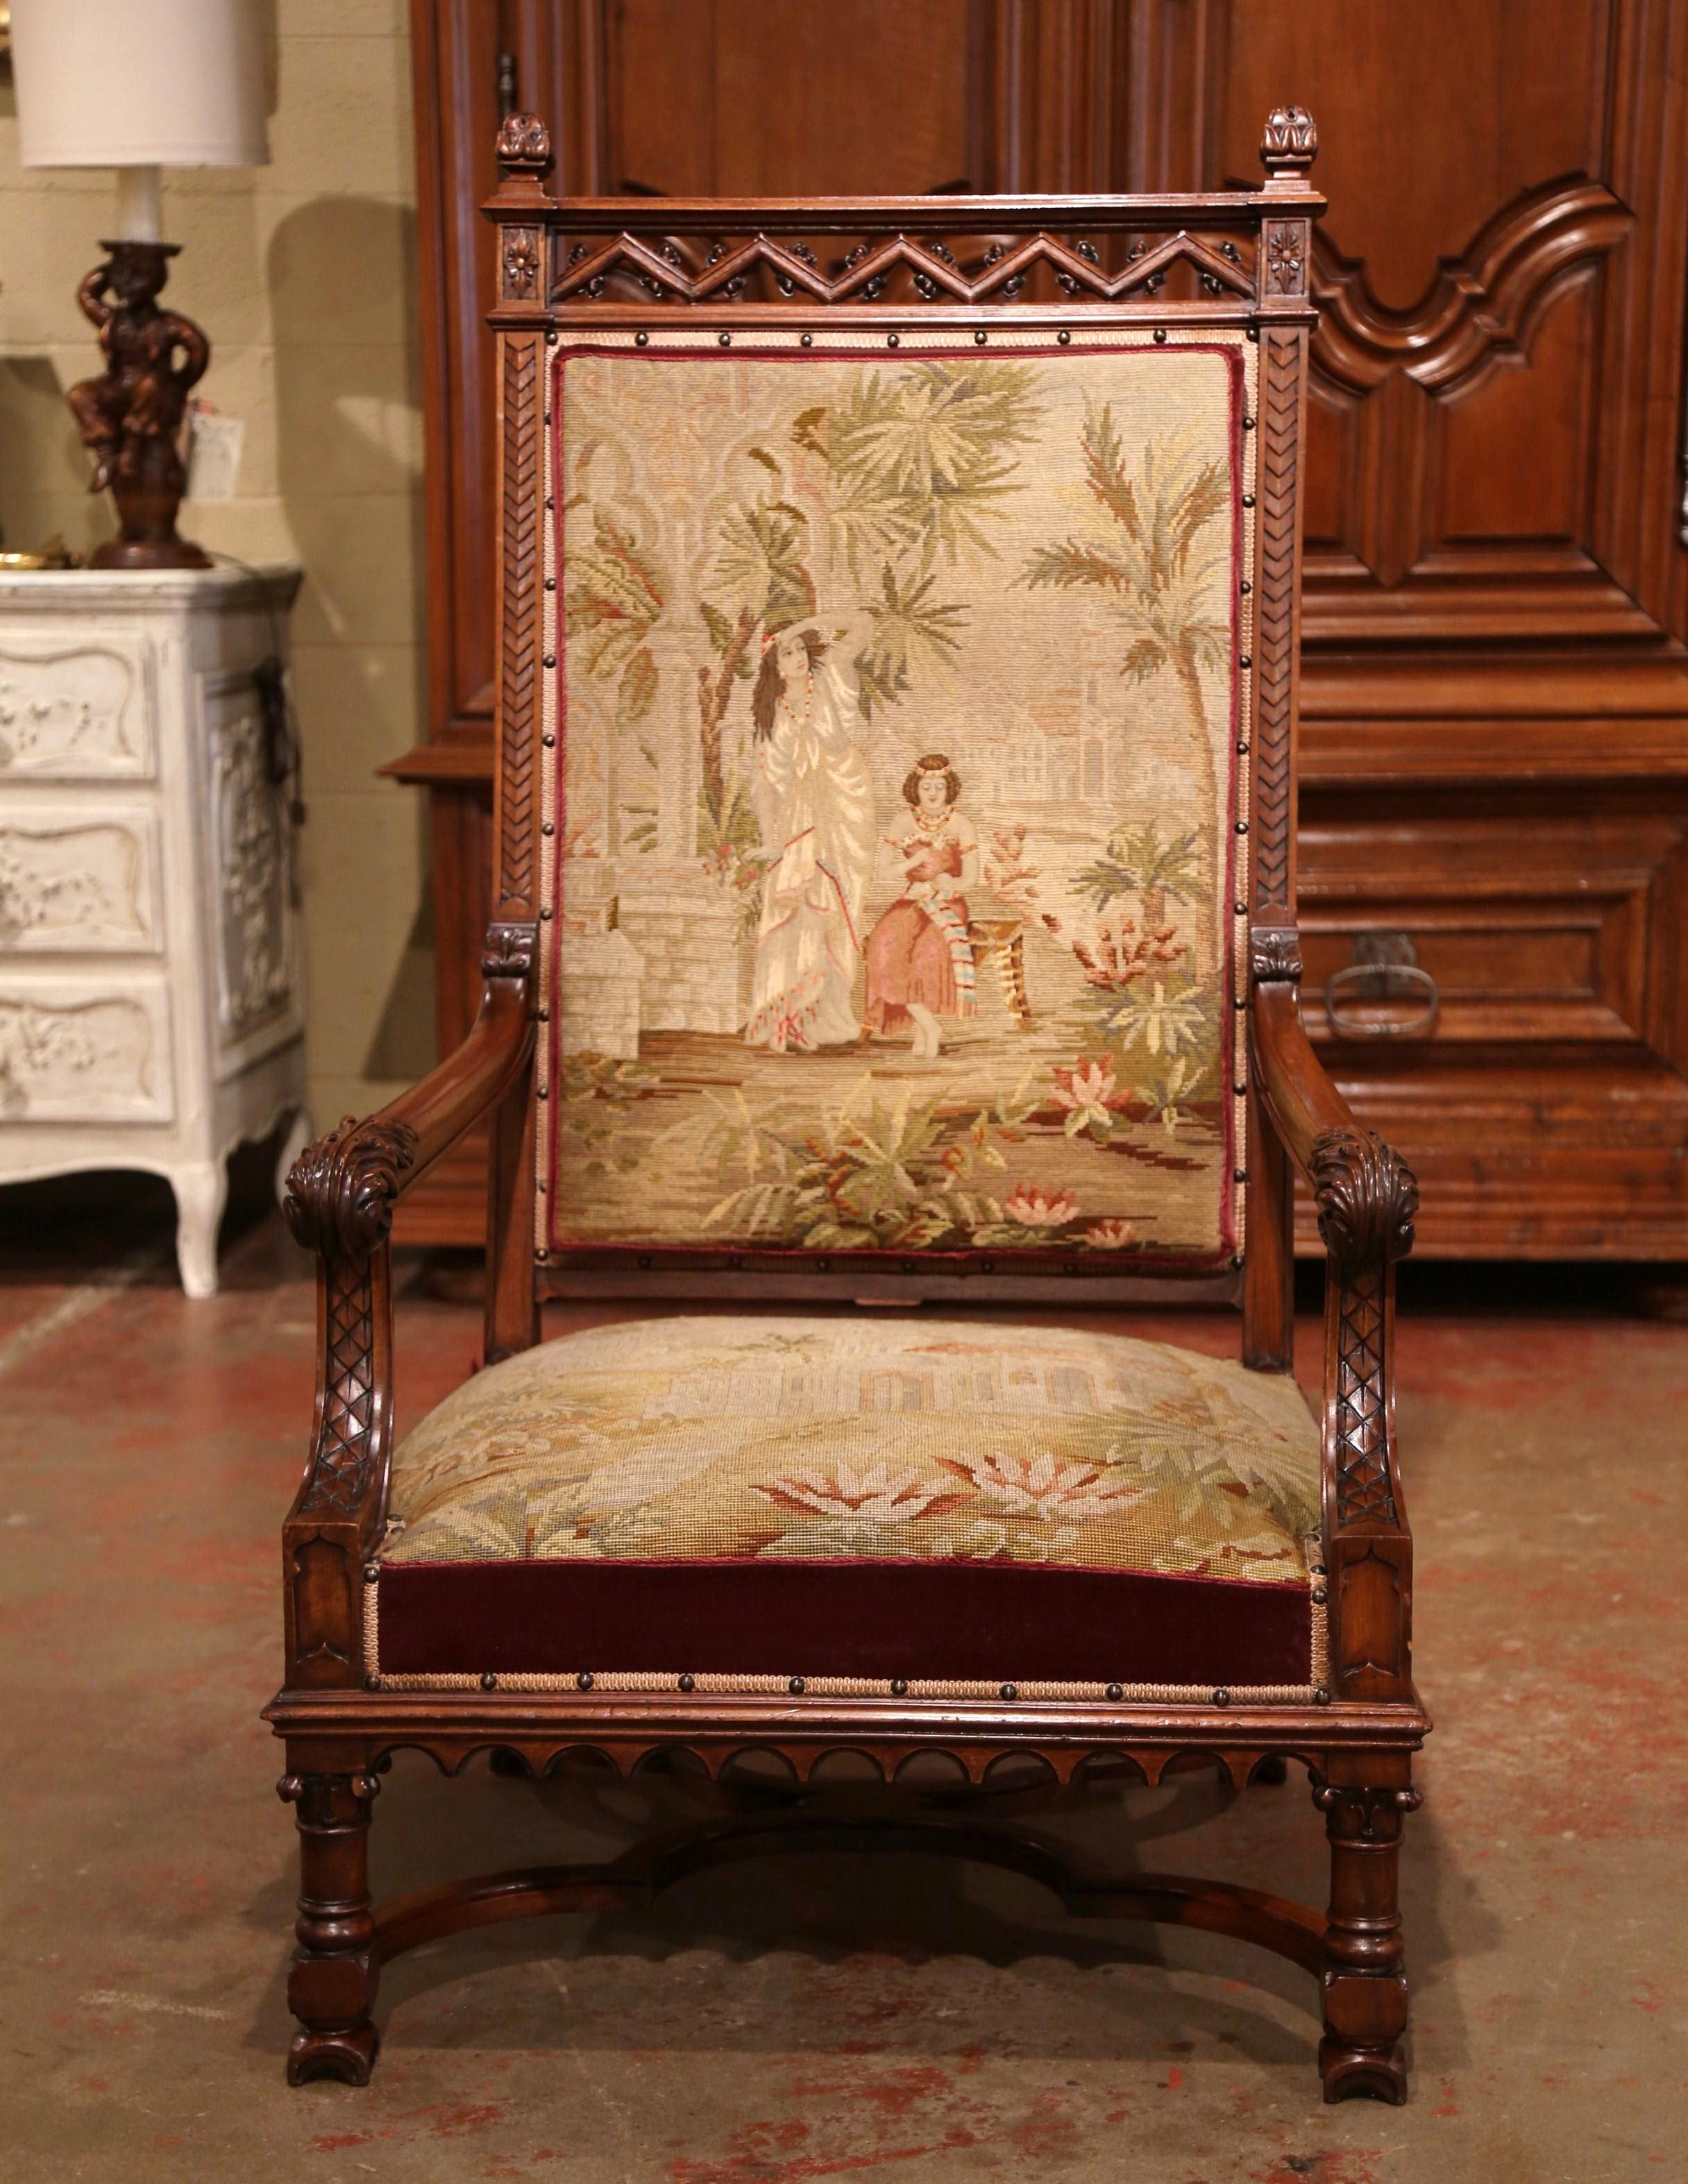 Decorate an office or a study with this large antique fruitwood king armchair, crafted in Southern France circa 1860, the important chair is upholstered with the original needlepoint tapestry, embellished with decorative nailheads. It features a